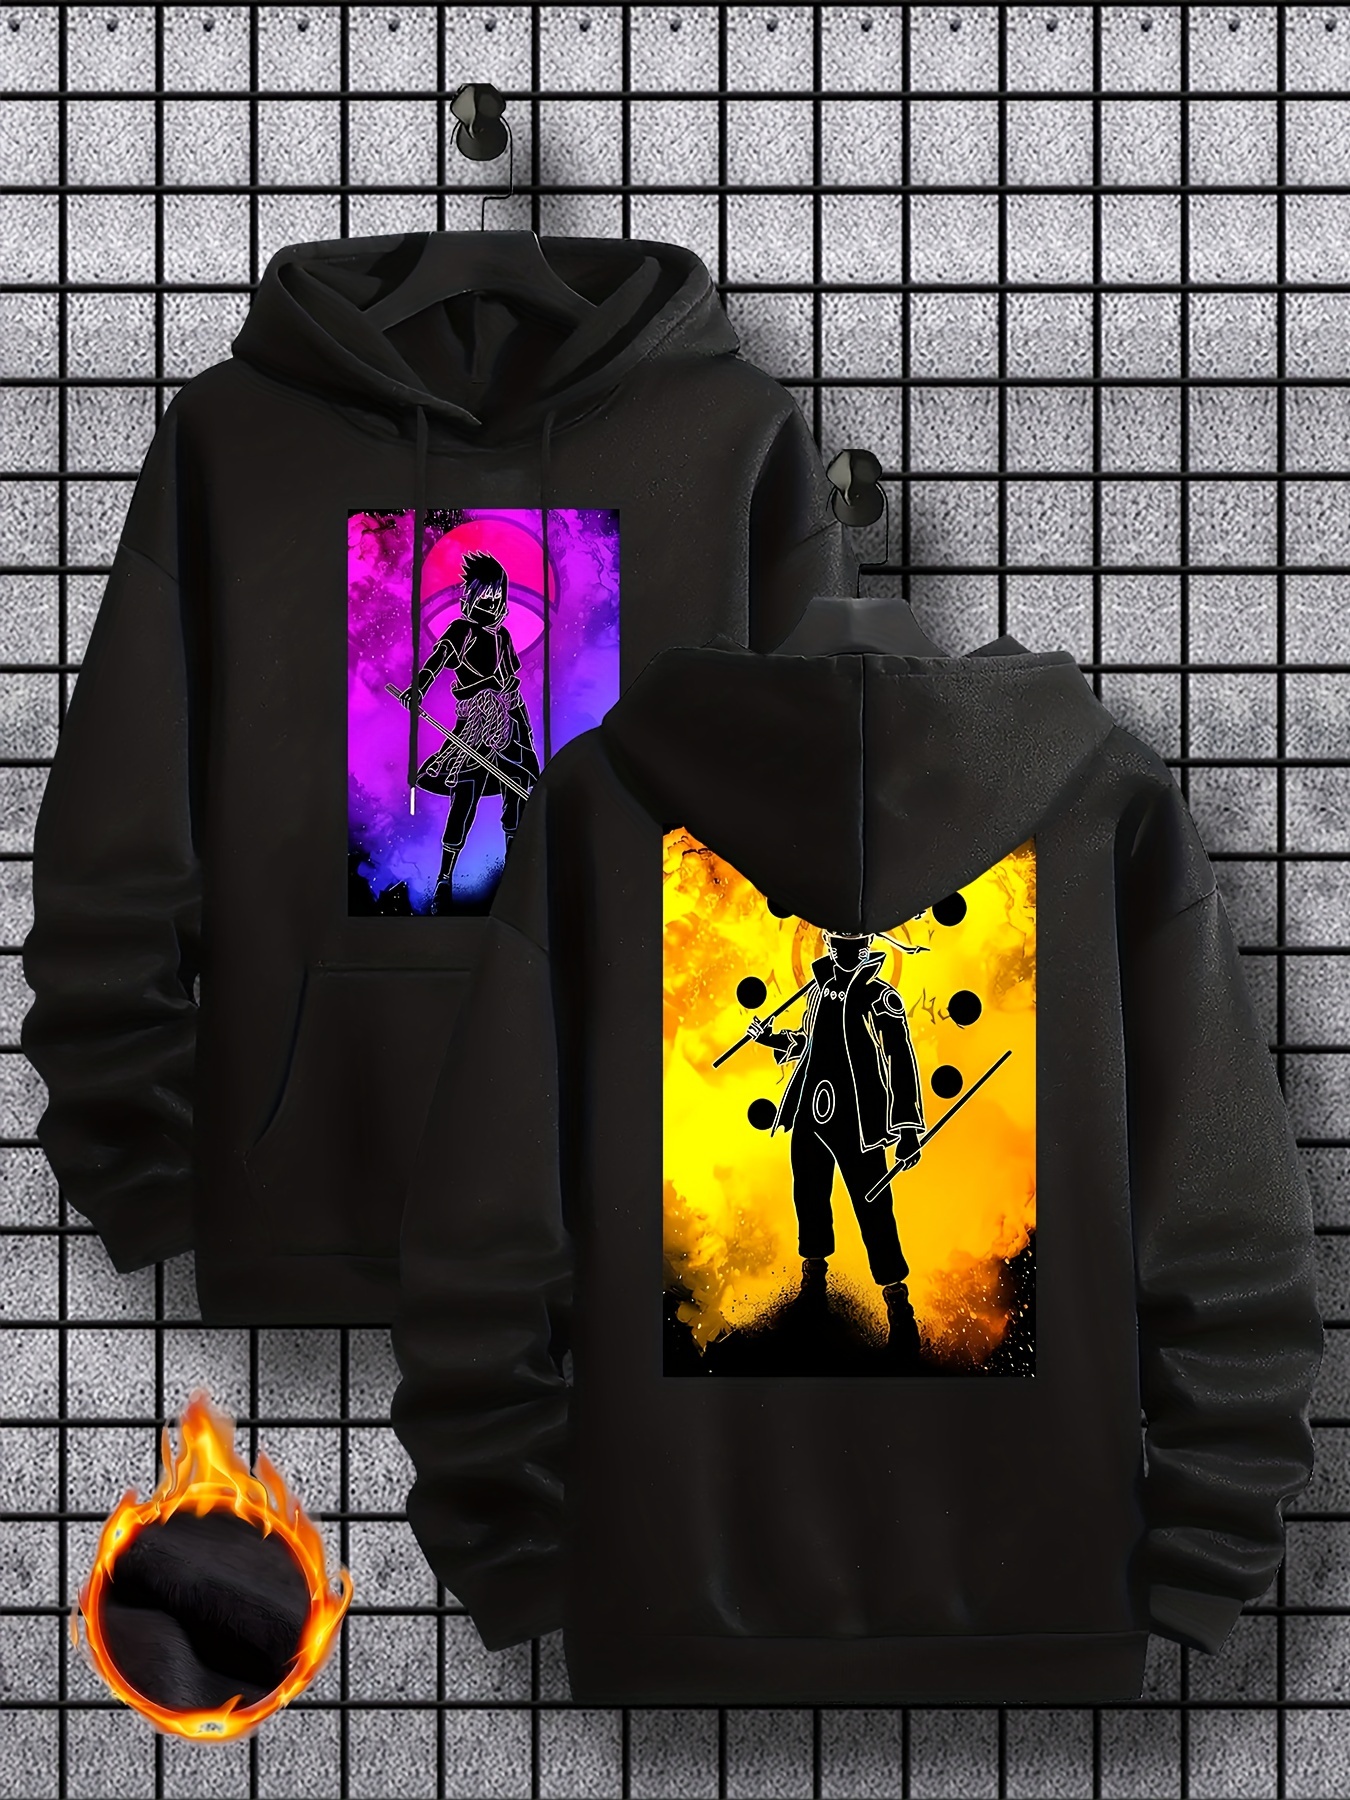 Styling Your Look With Anime Hoodies And Shirts For Men - TechBullion